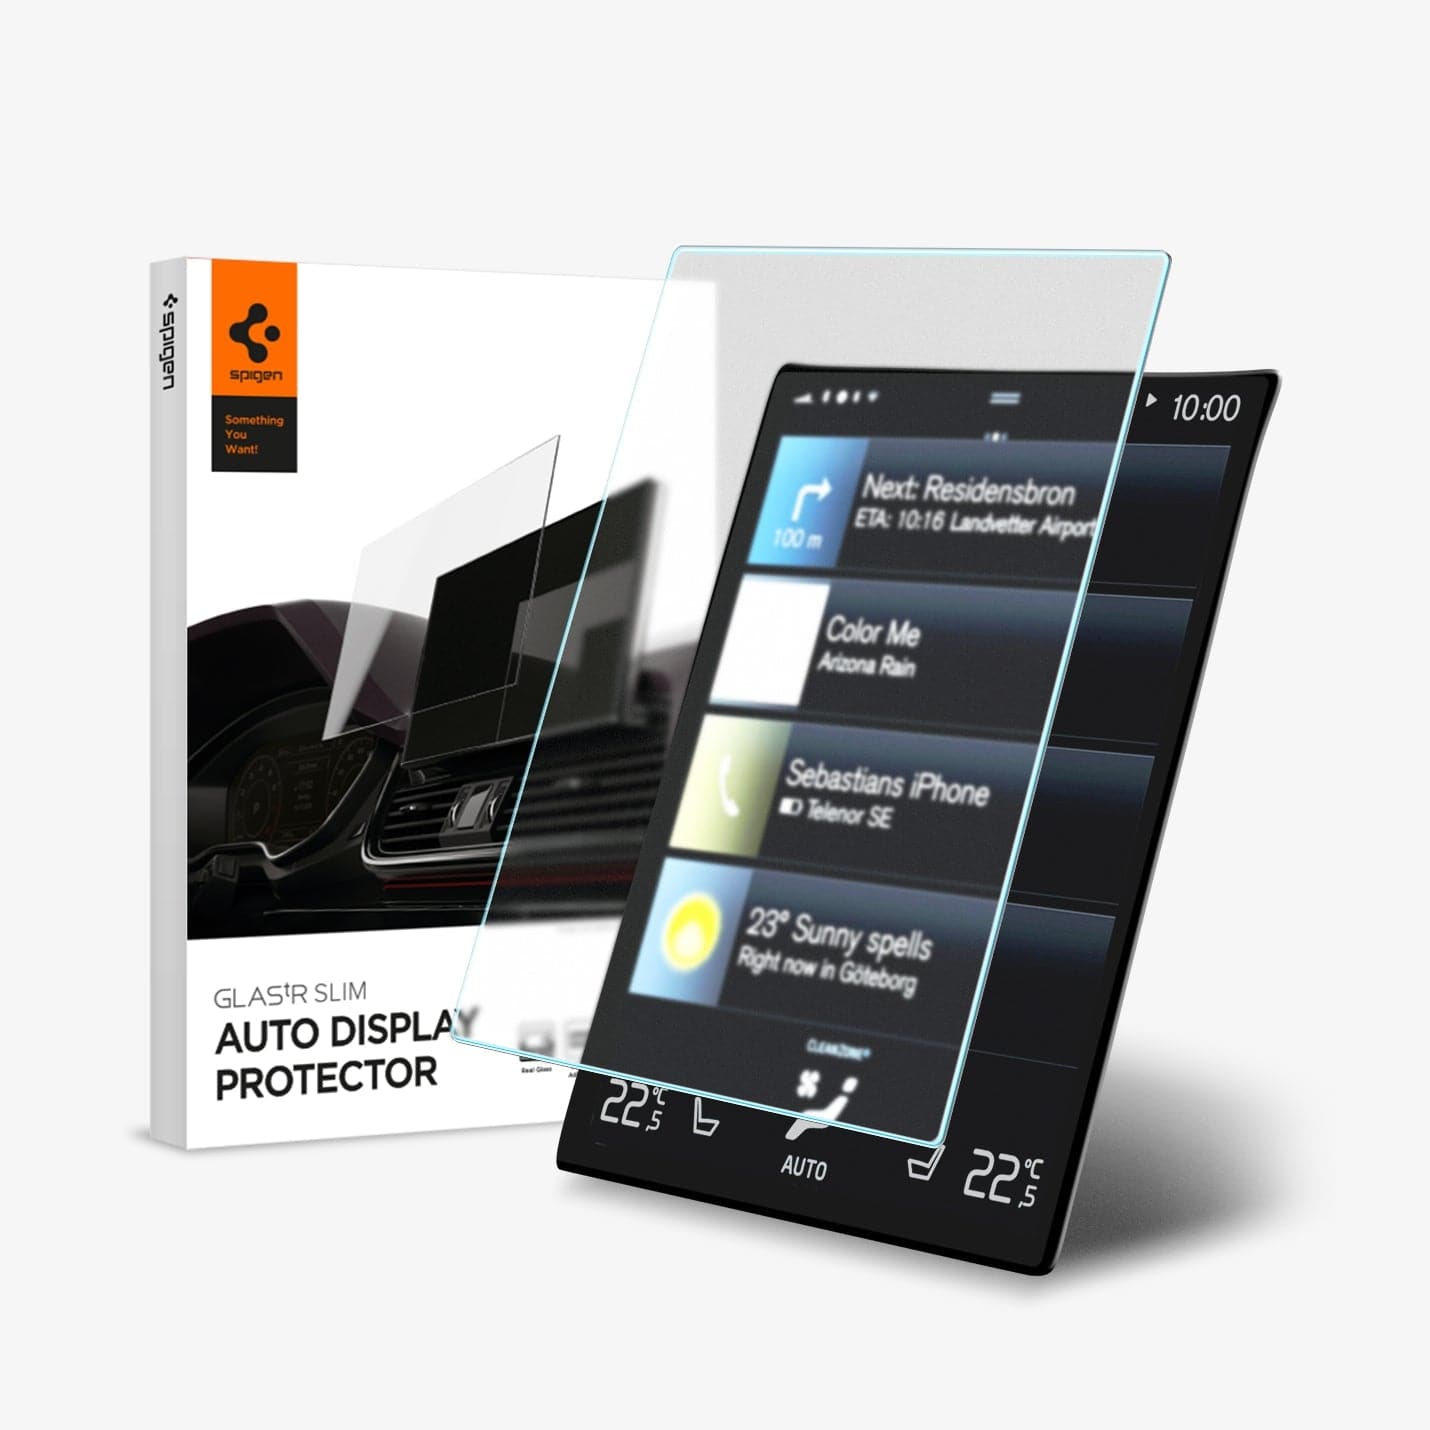 AGL04119 - Volvo 8.7" Screen Protector GLAS.tR SLIM Anti-Glare showing the touch screen display, screen protector and packaging